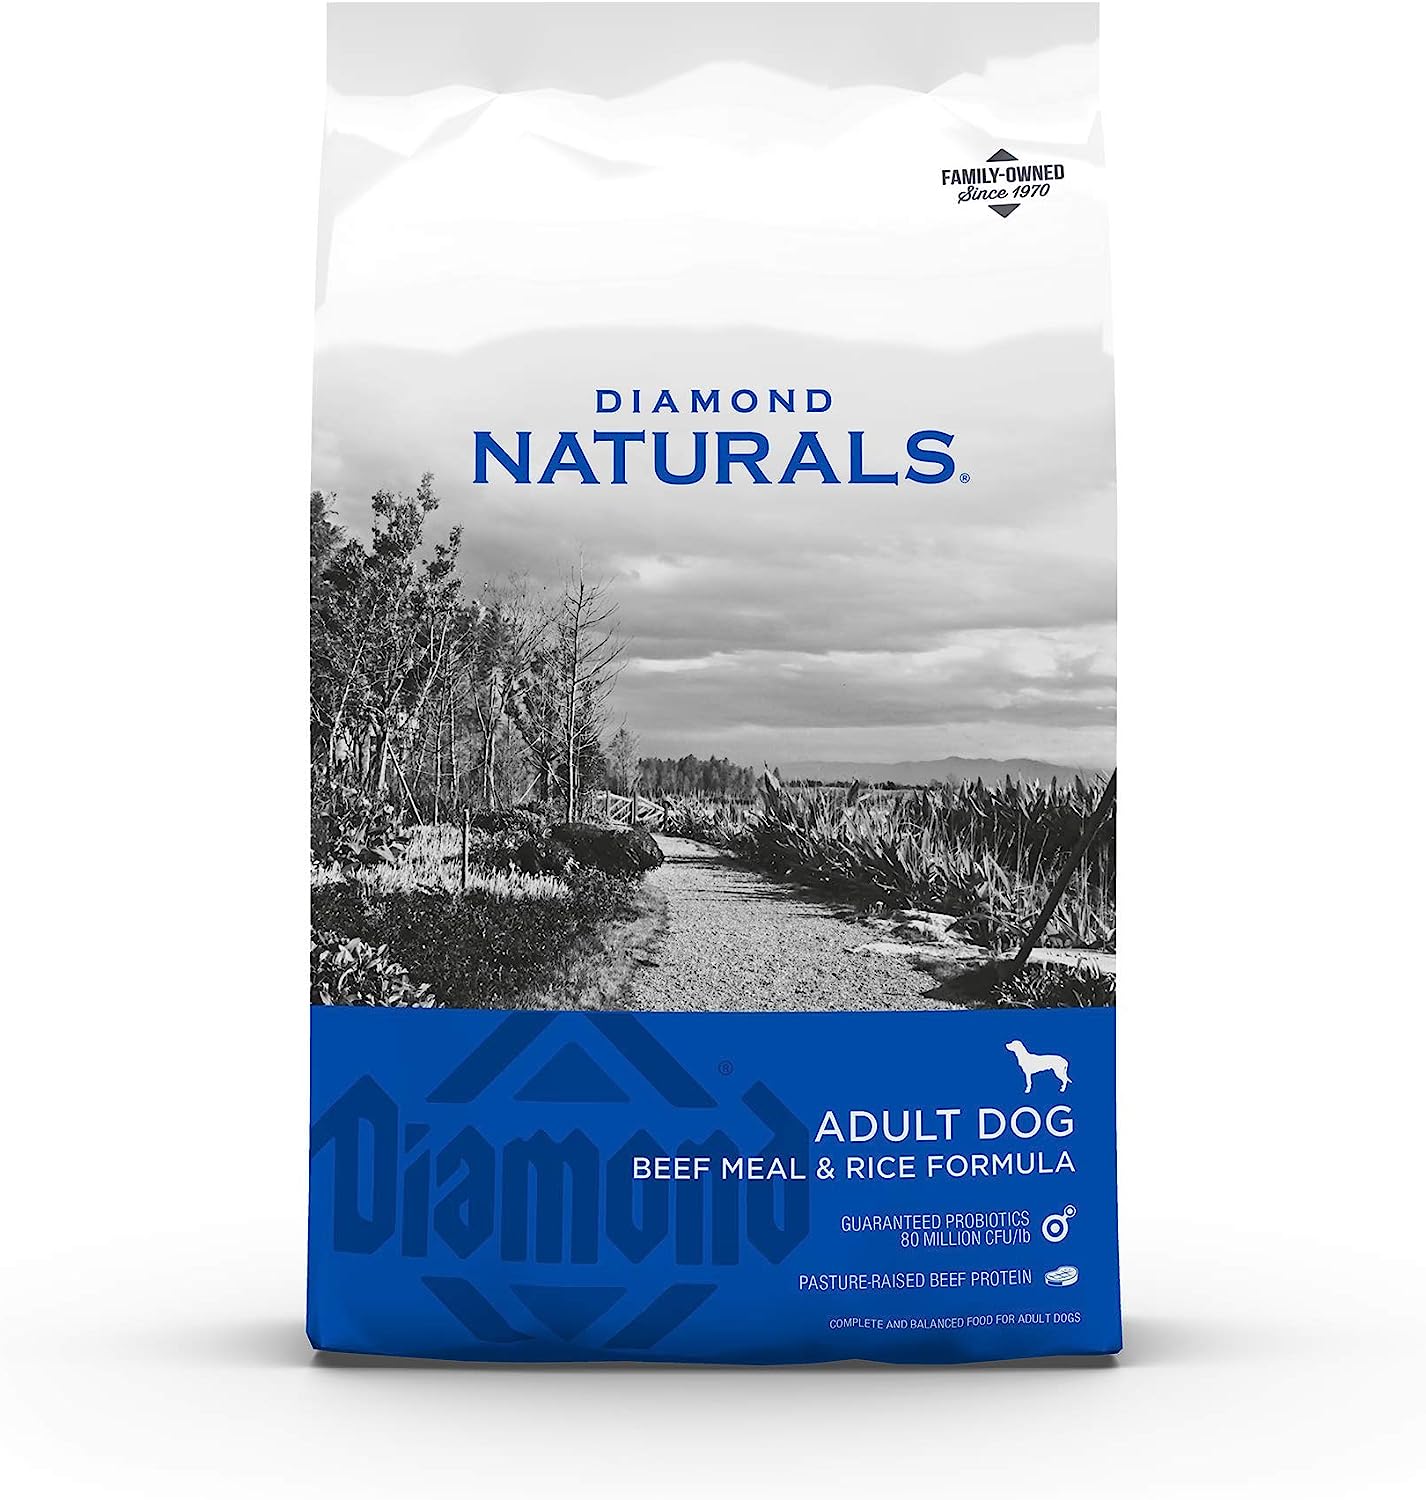 Diamond Naturals Adult Dog Beef Meal & Rice Formula Dry Dog Food – Gallery Image 1